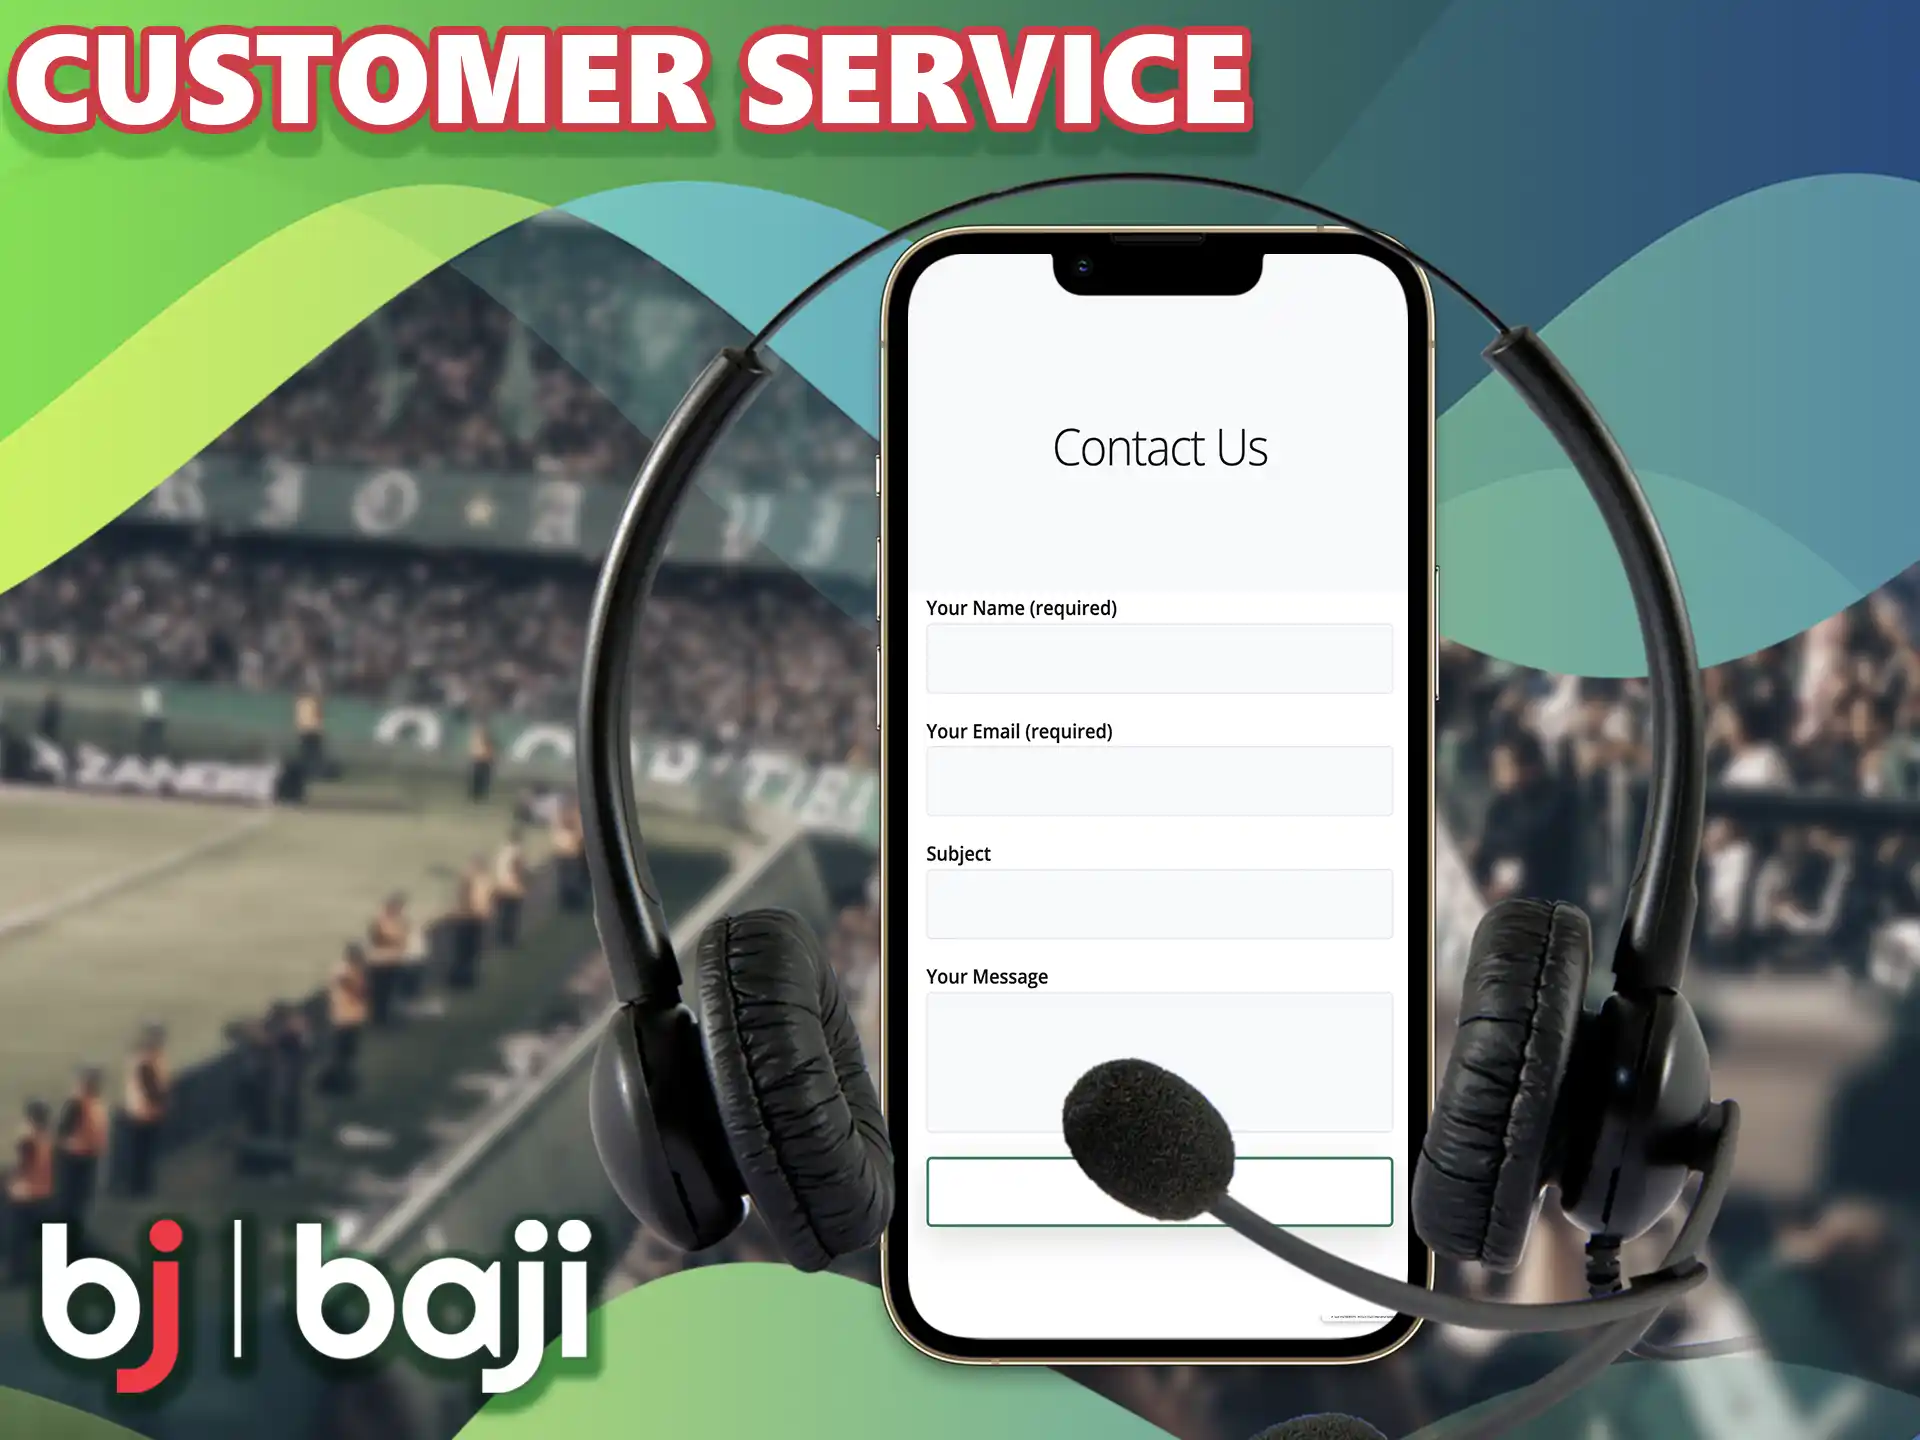 Baji specialists are available 24/7 to answer your questions, if you have any questions, you can always contact them.